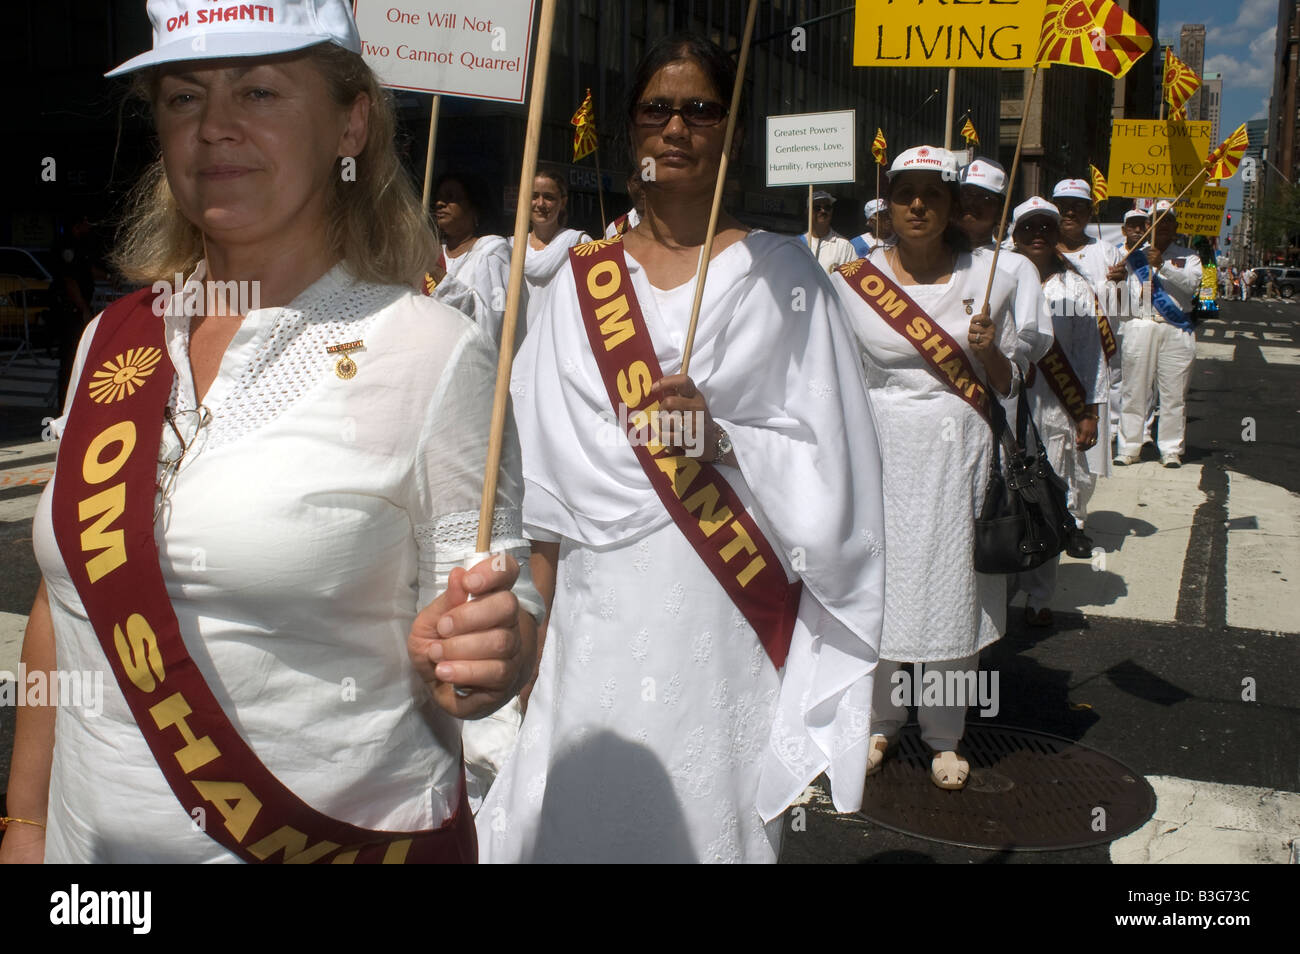 Members of the Brahma Kumaris World Spiritual Organization march in the Indian Independence Day Parade in New York Stock Photo